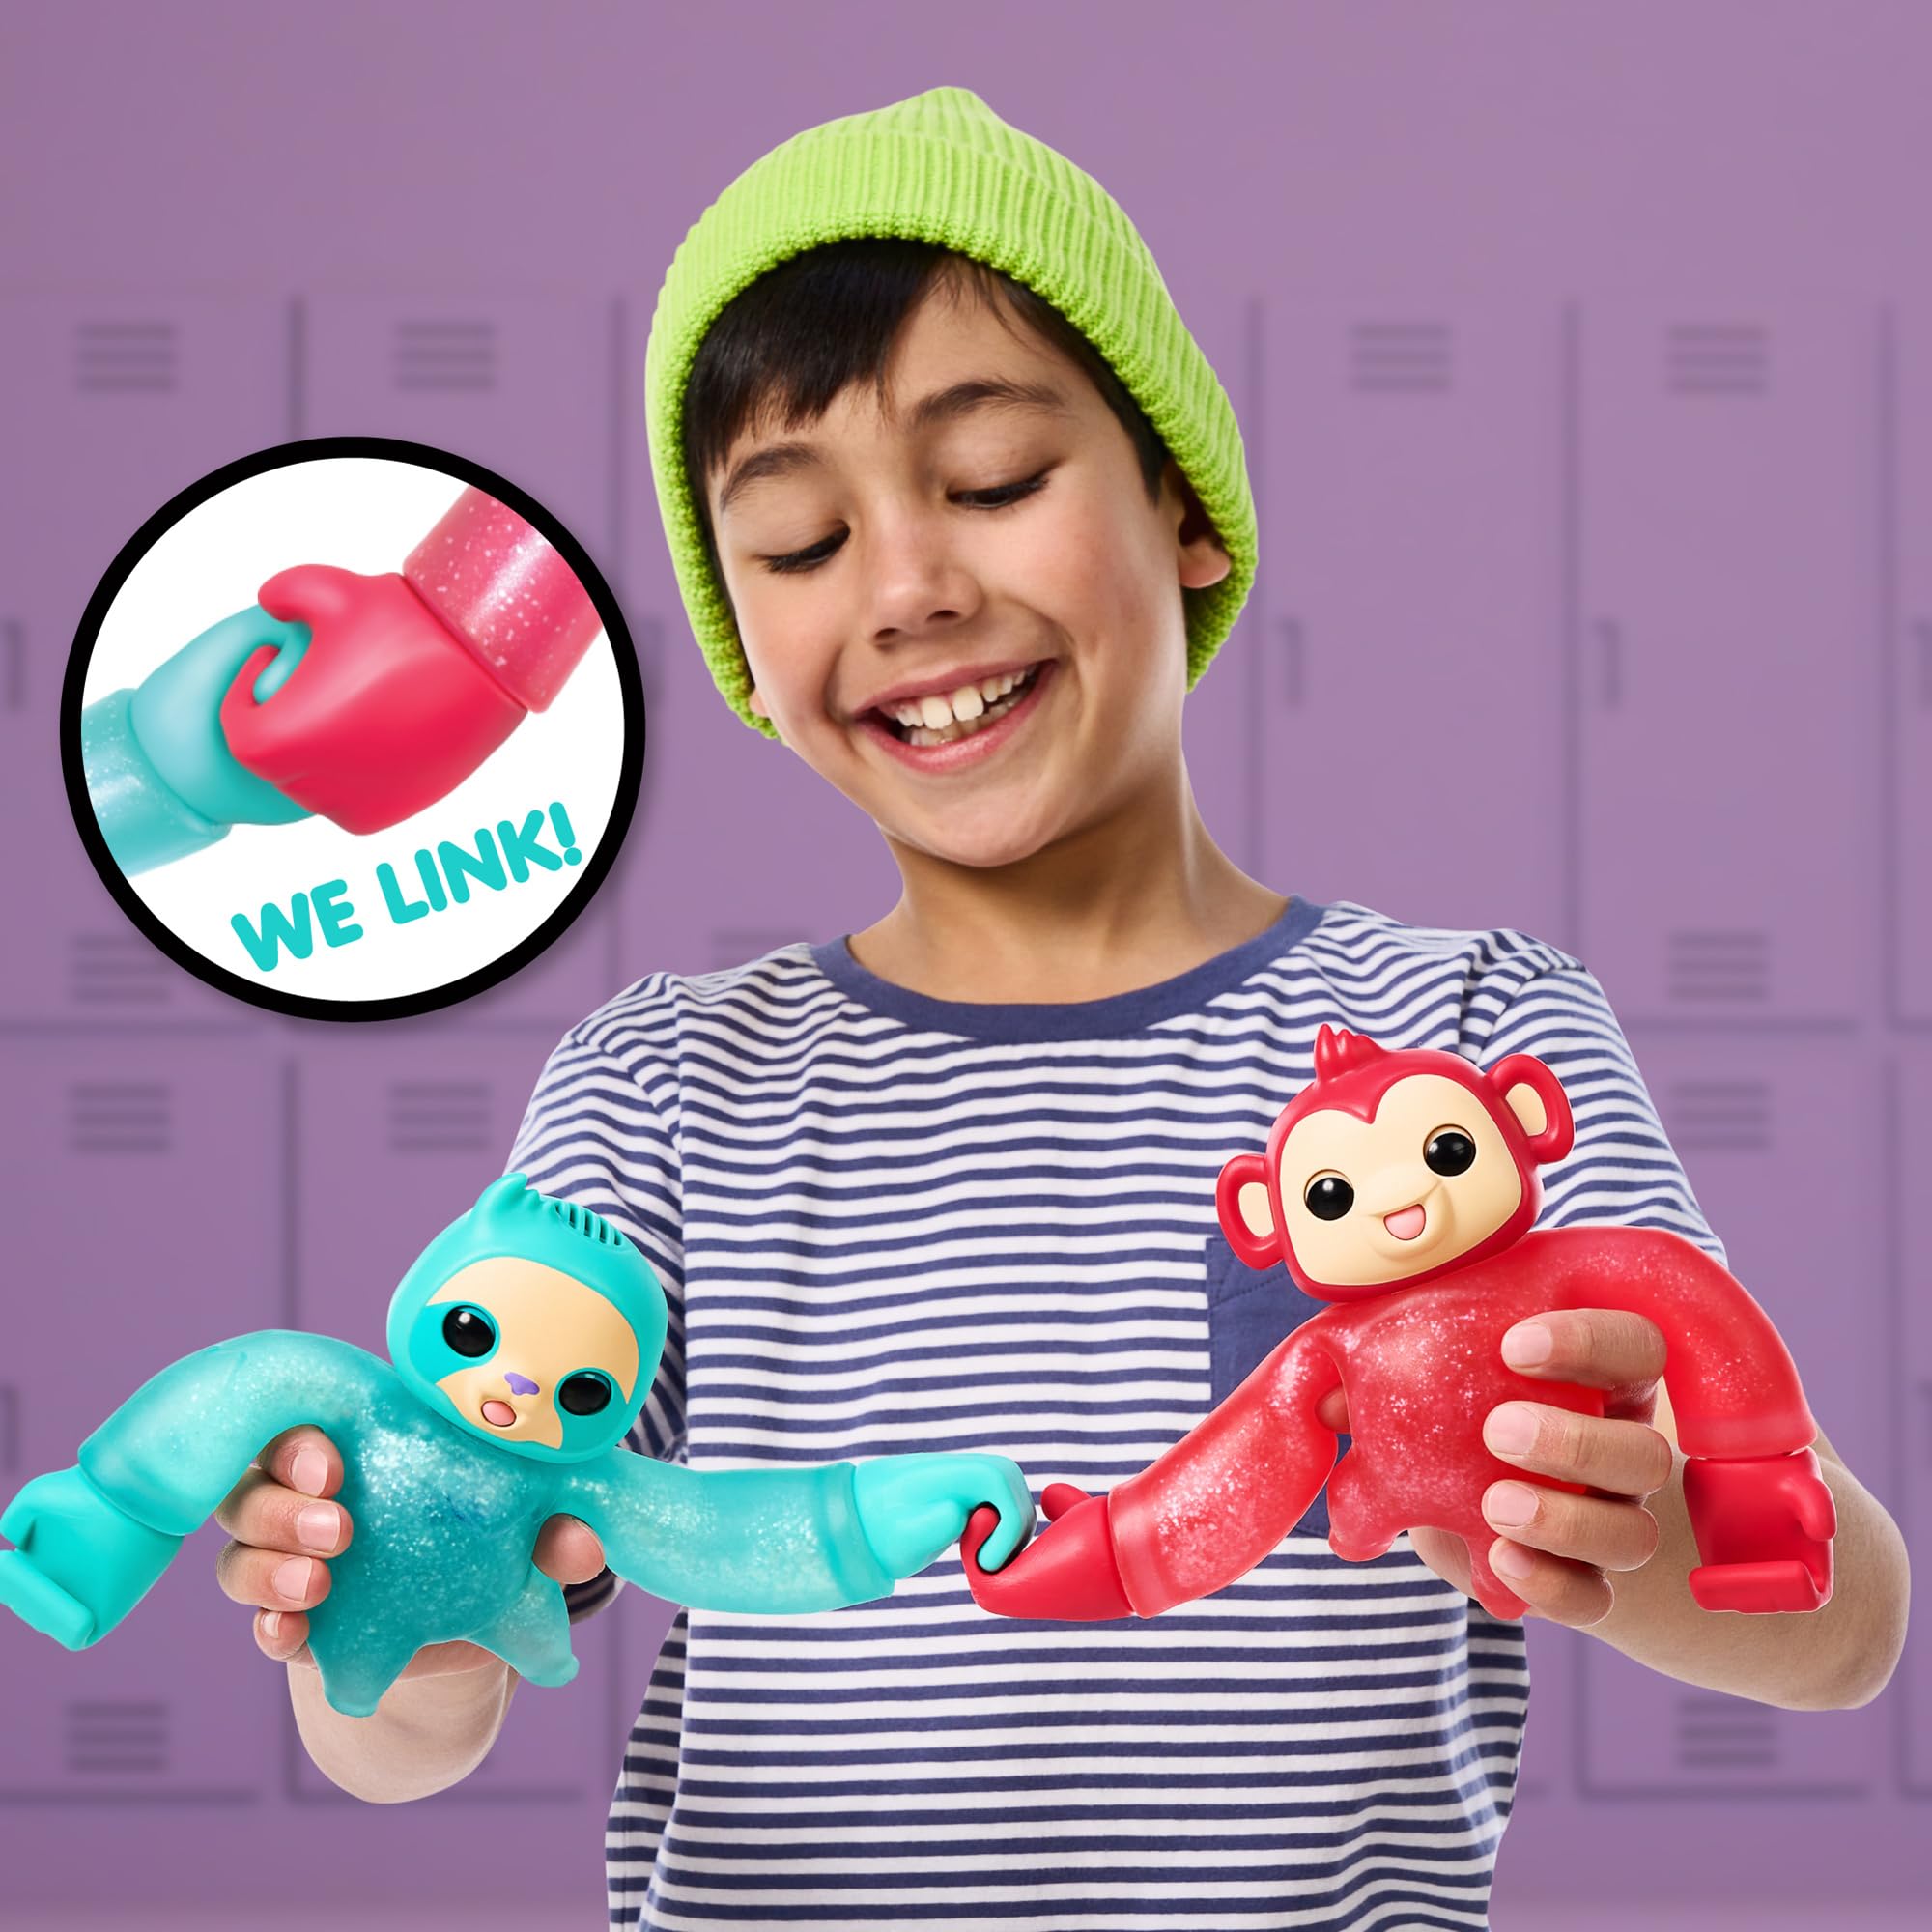 Little Live Pets Hug n' Hang Zoogooz - Sensoo Sloth. an Interactive Electronic Squishy Stretchy Toy Pet with 70+ Sounds & Reactions. Stretch, Squish and Link Their Hands